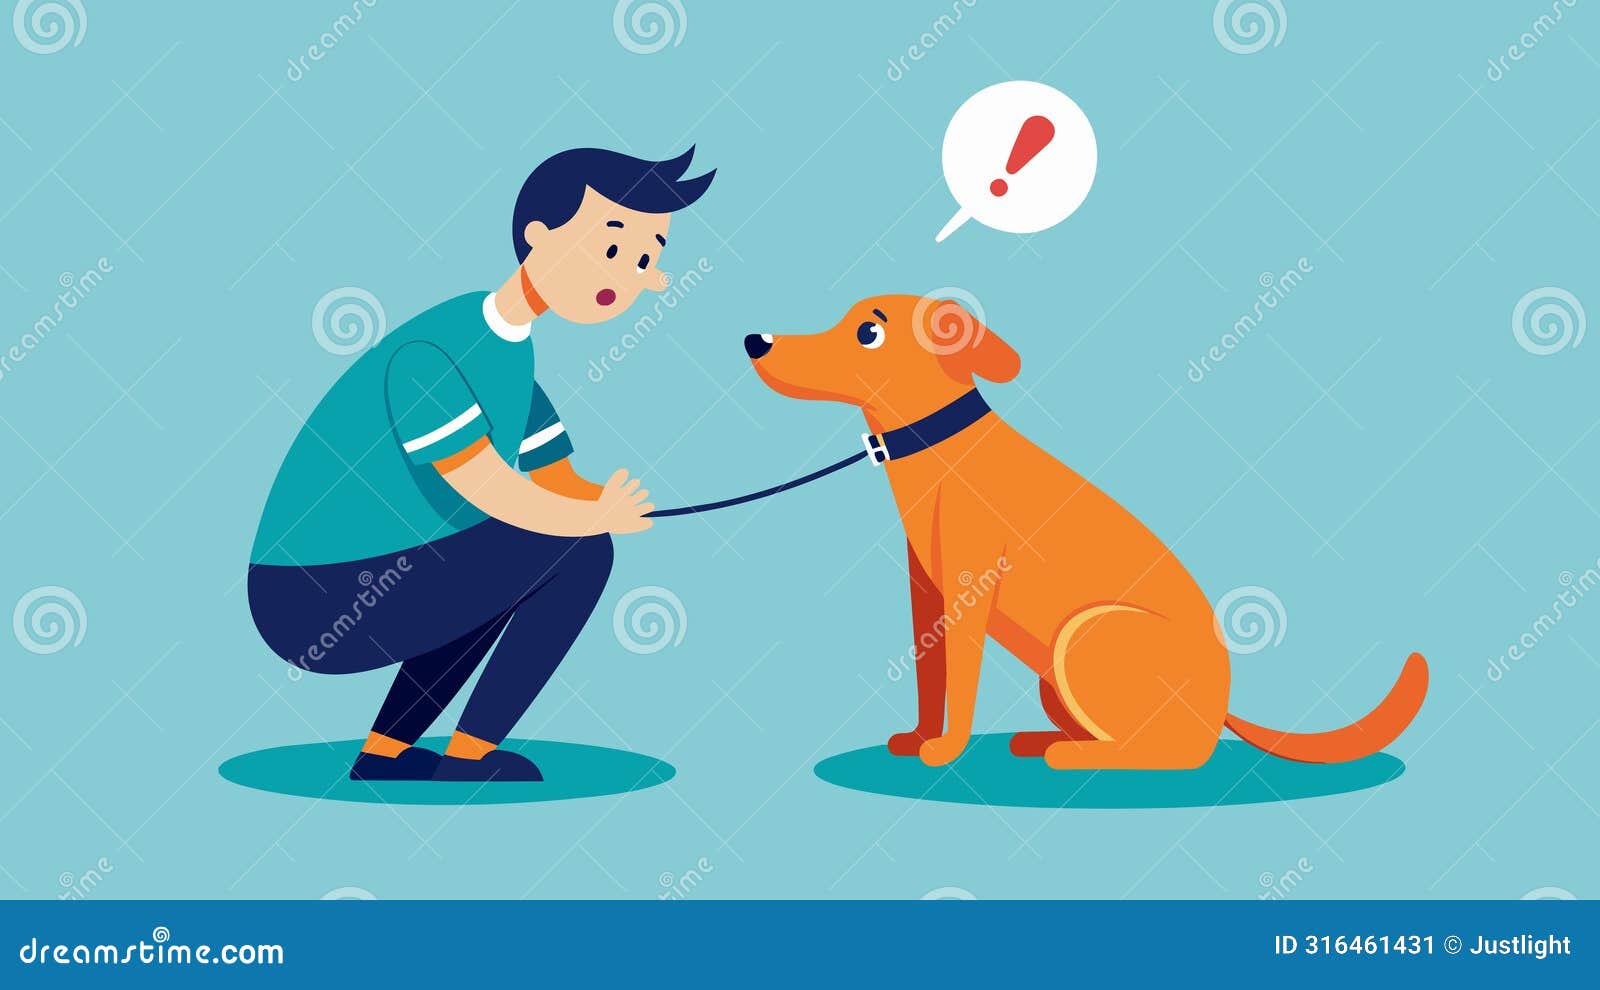 a service dog alerting its owner to a potential panic attack prompting them to take deep breaths and use grounding